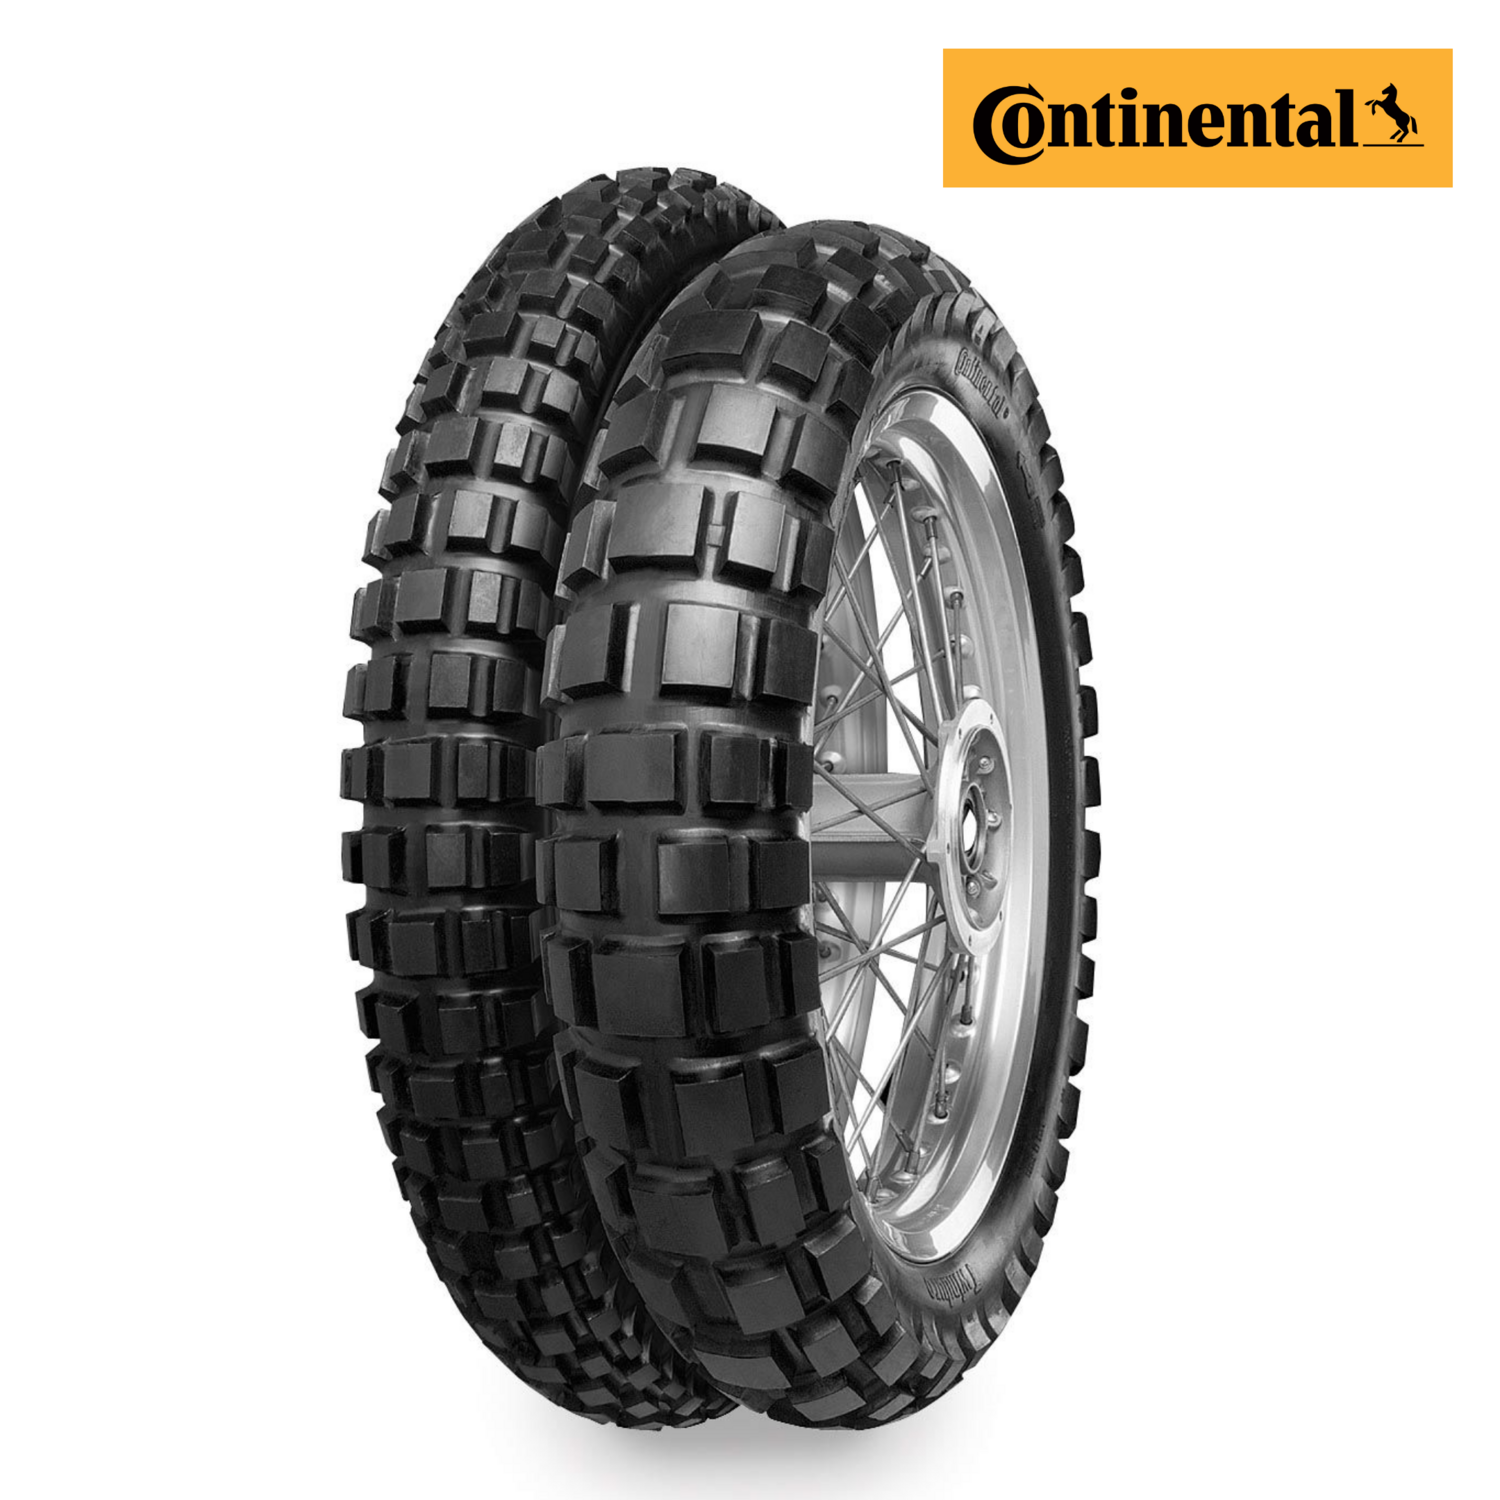 CONTINENTAL TKC 80 110/80R19 Tubeless 59 V Front Two-Wheeler Tyre